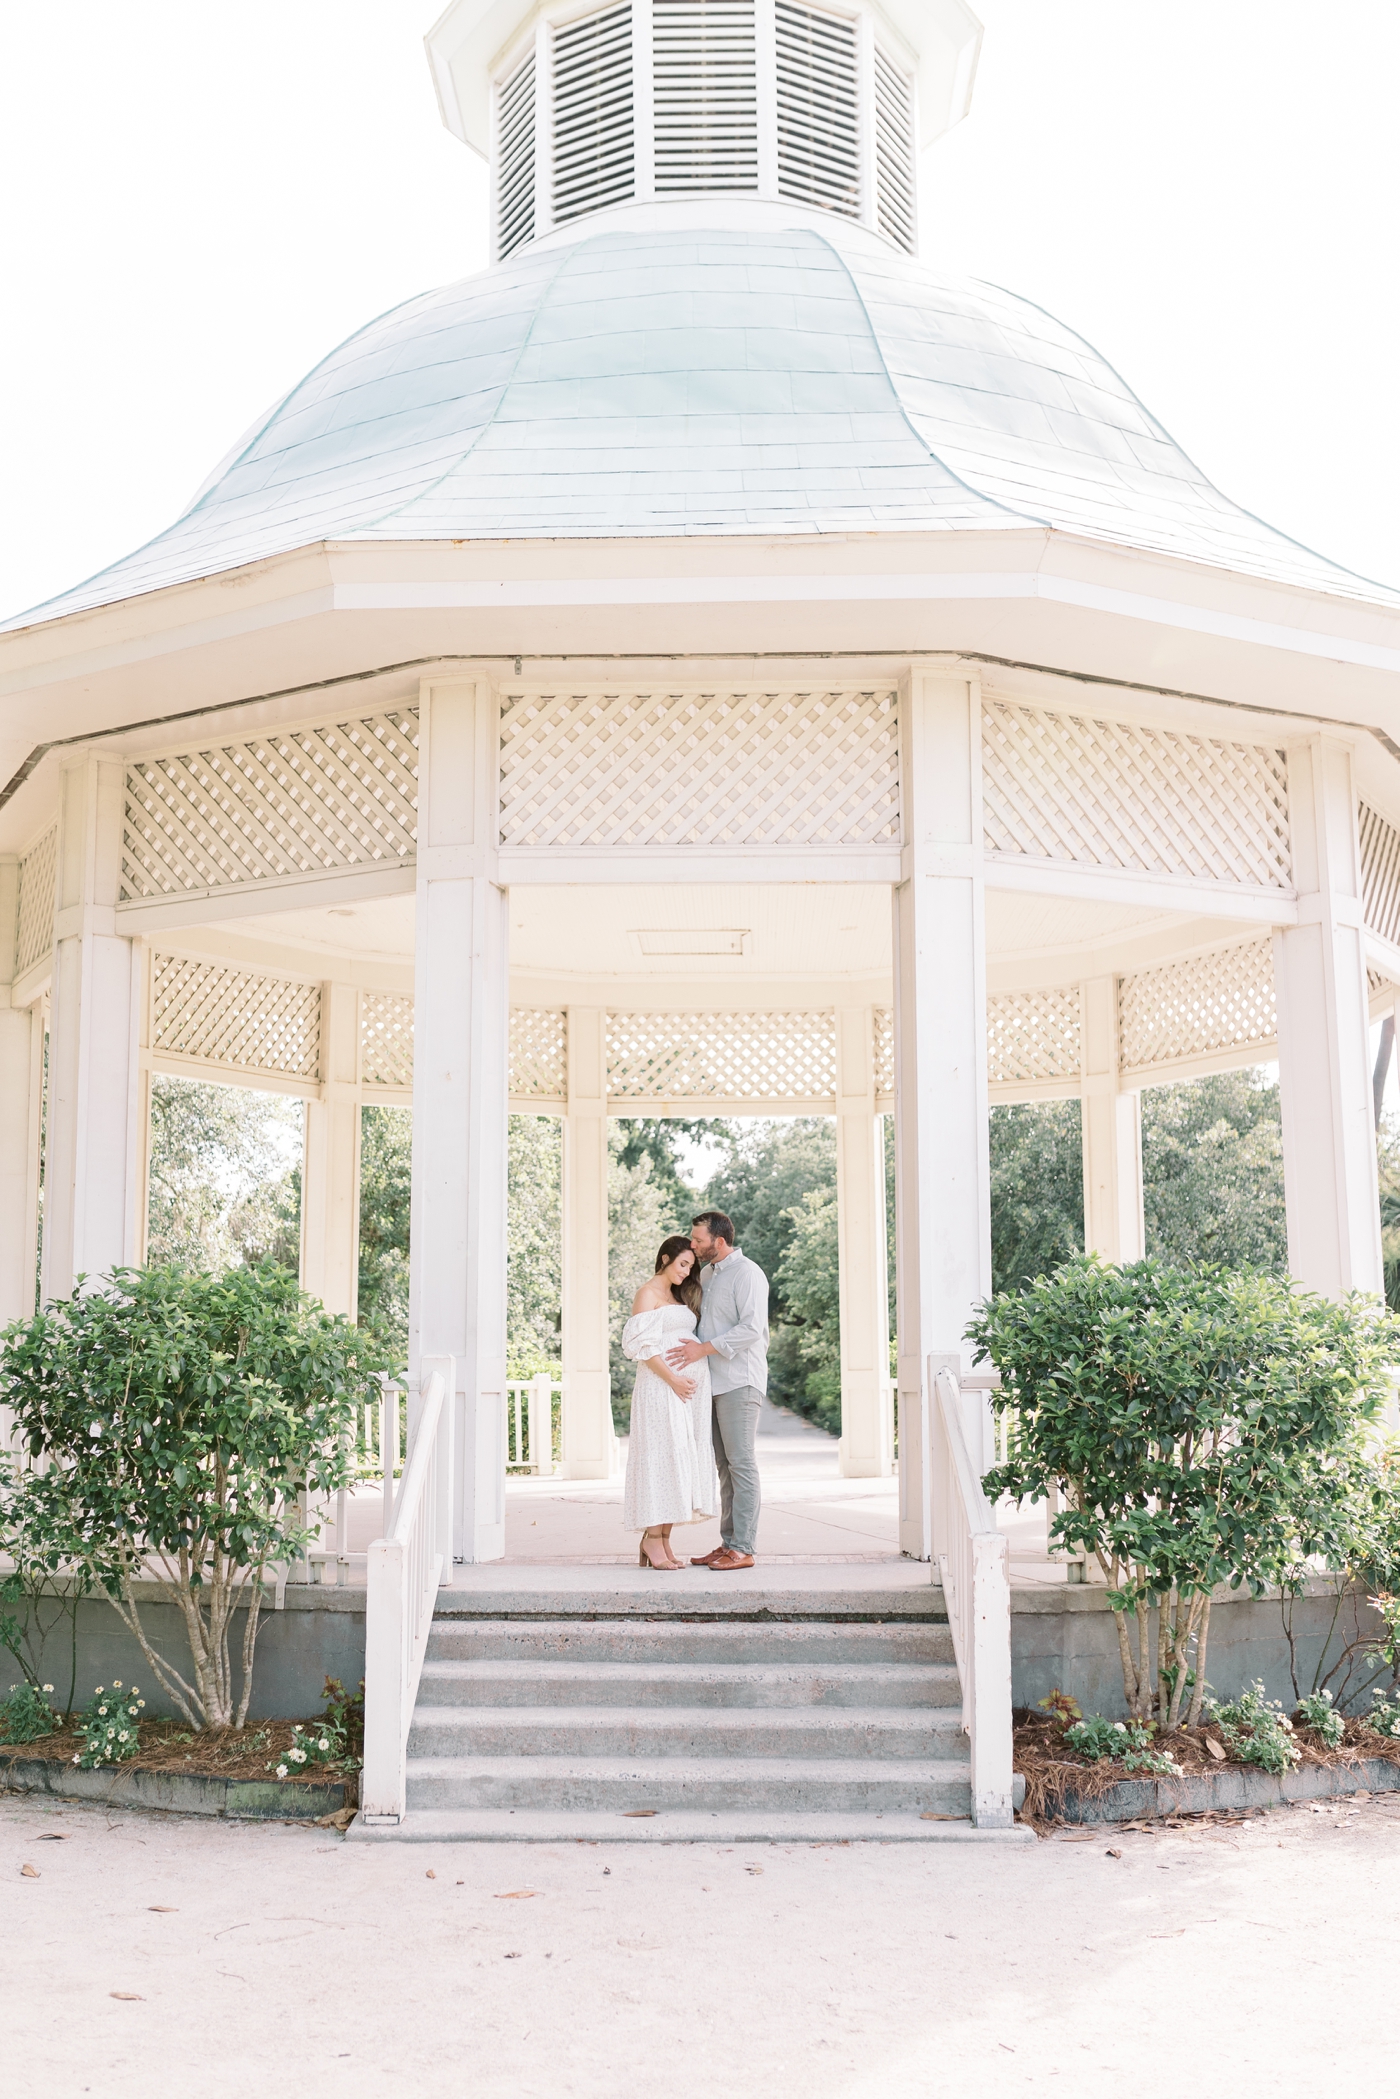 Mom and dad to be standing under a gazebo in Hampton Park | Photo by Caitlyn Motycka Photography.